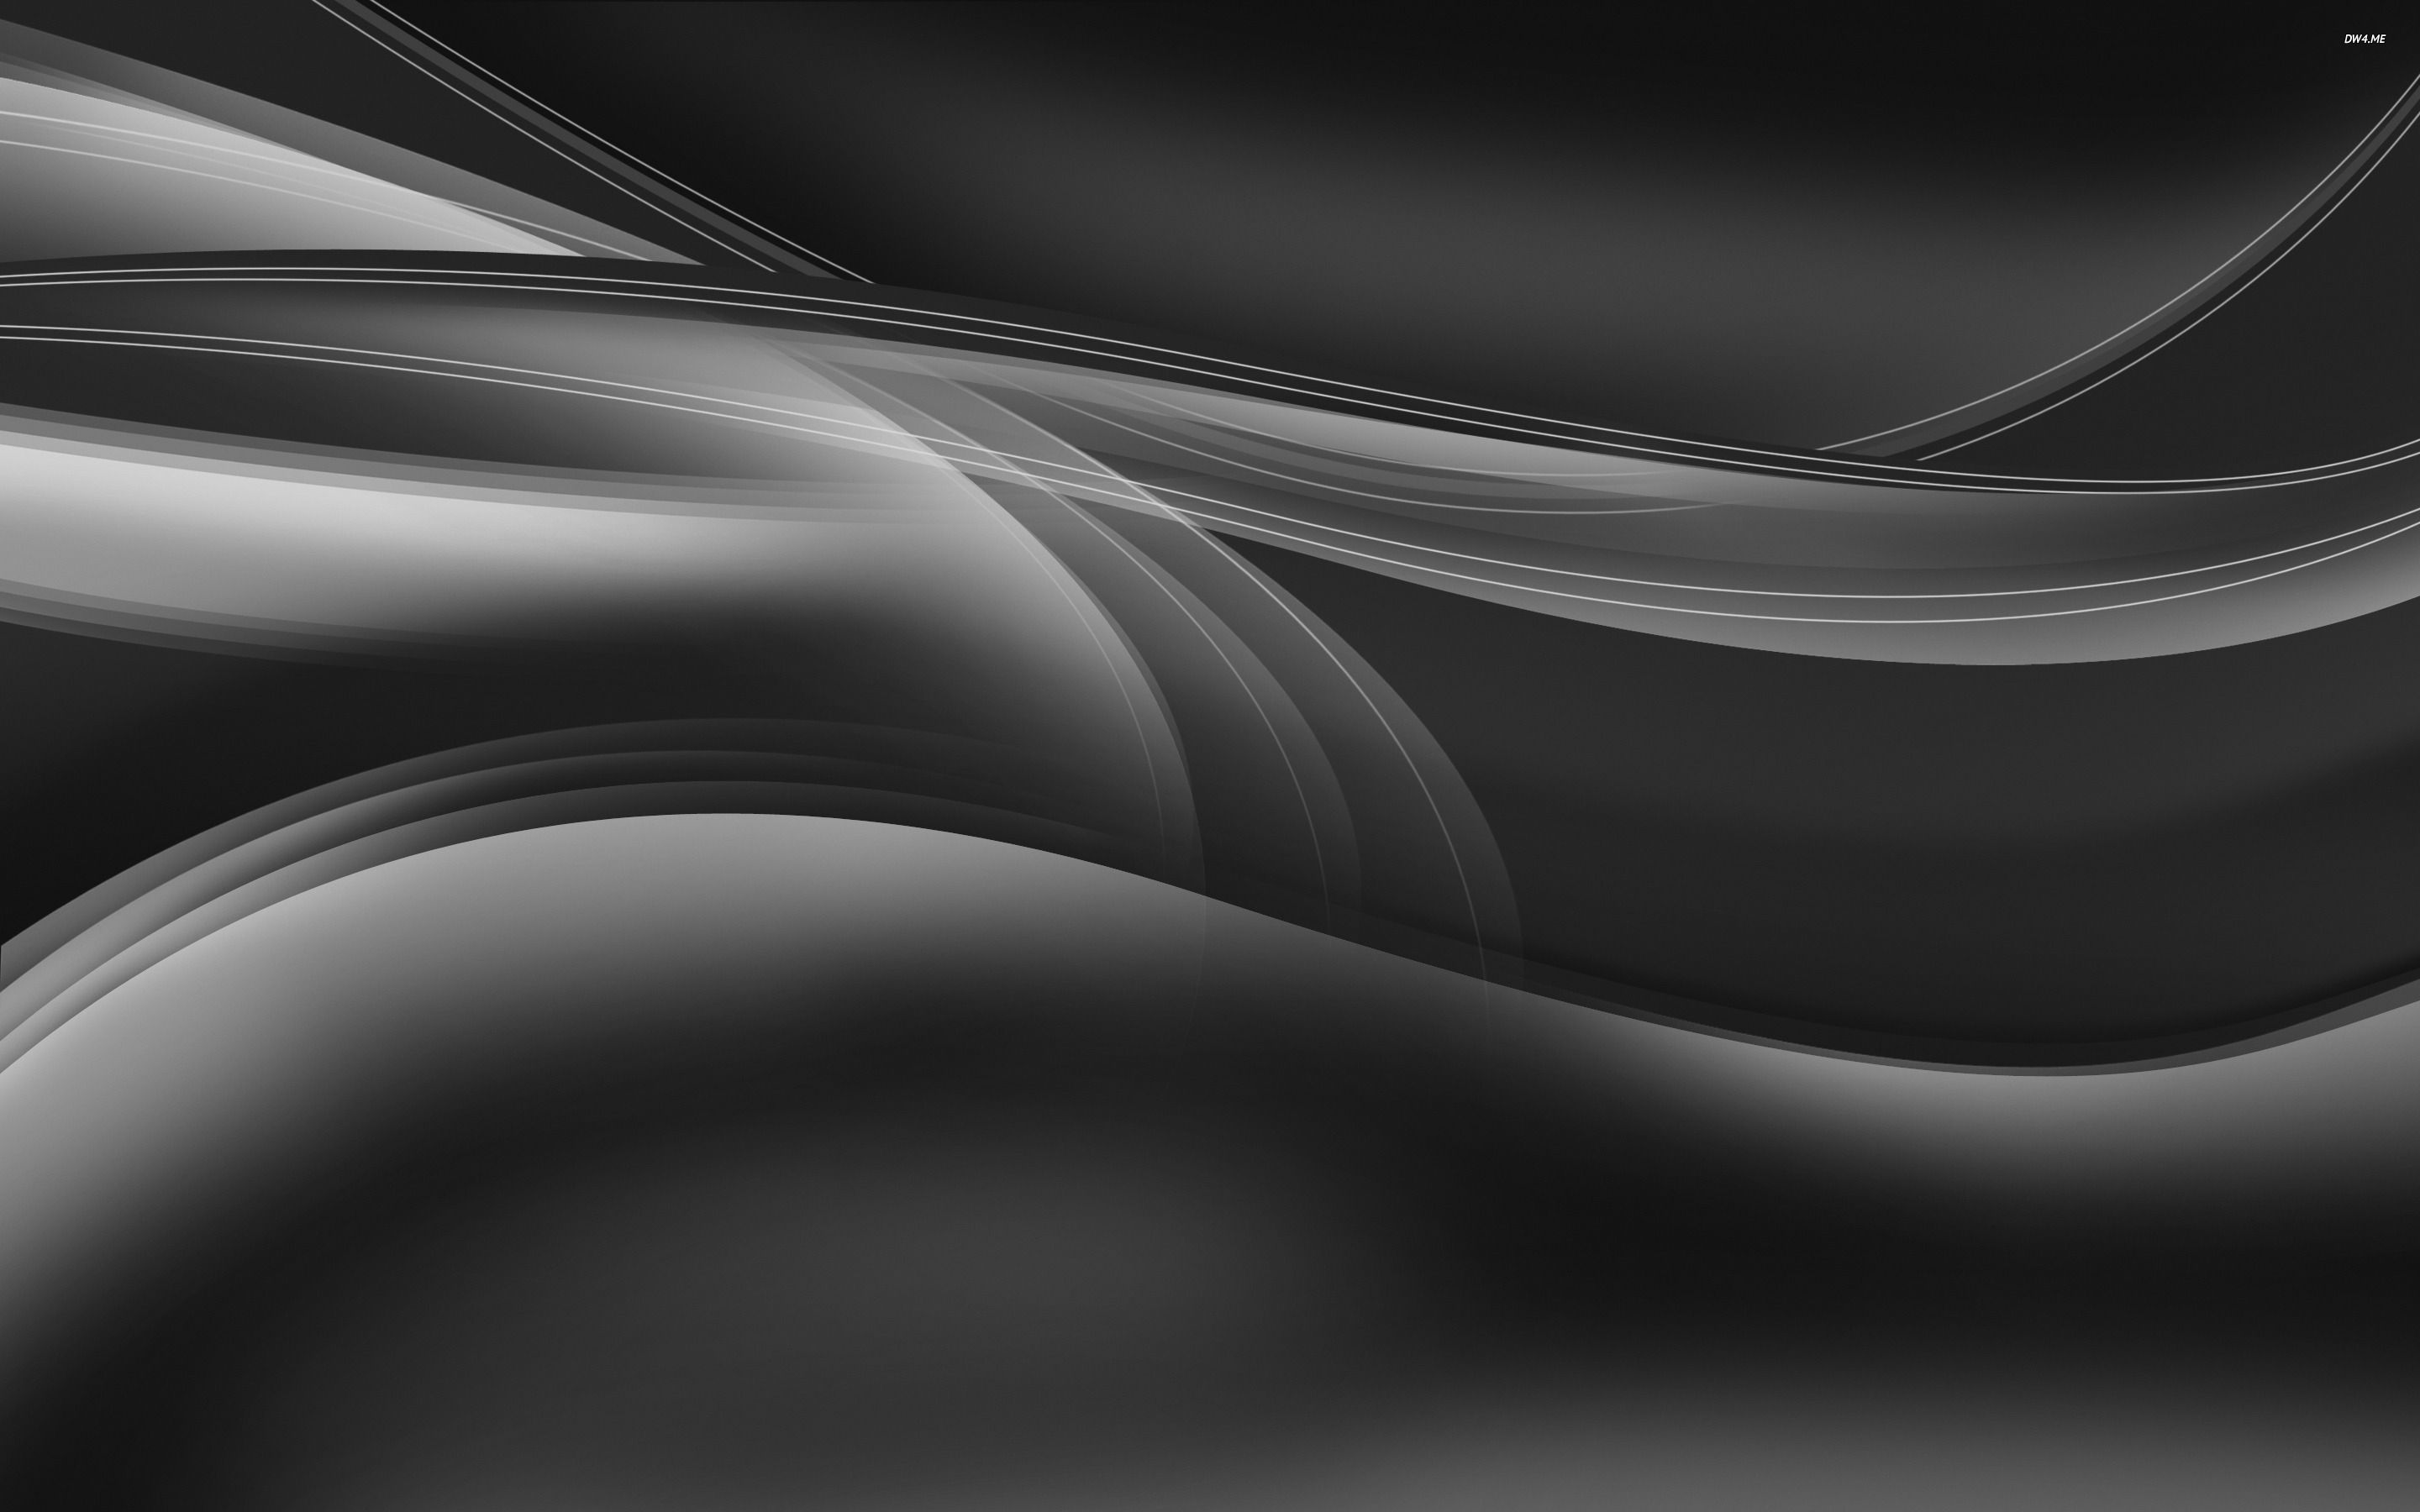 A black and white abstract artwork - Silver